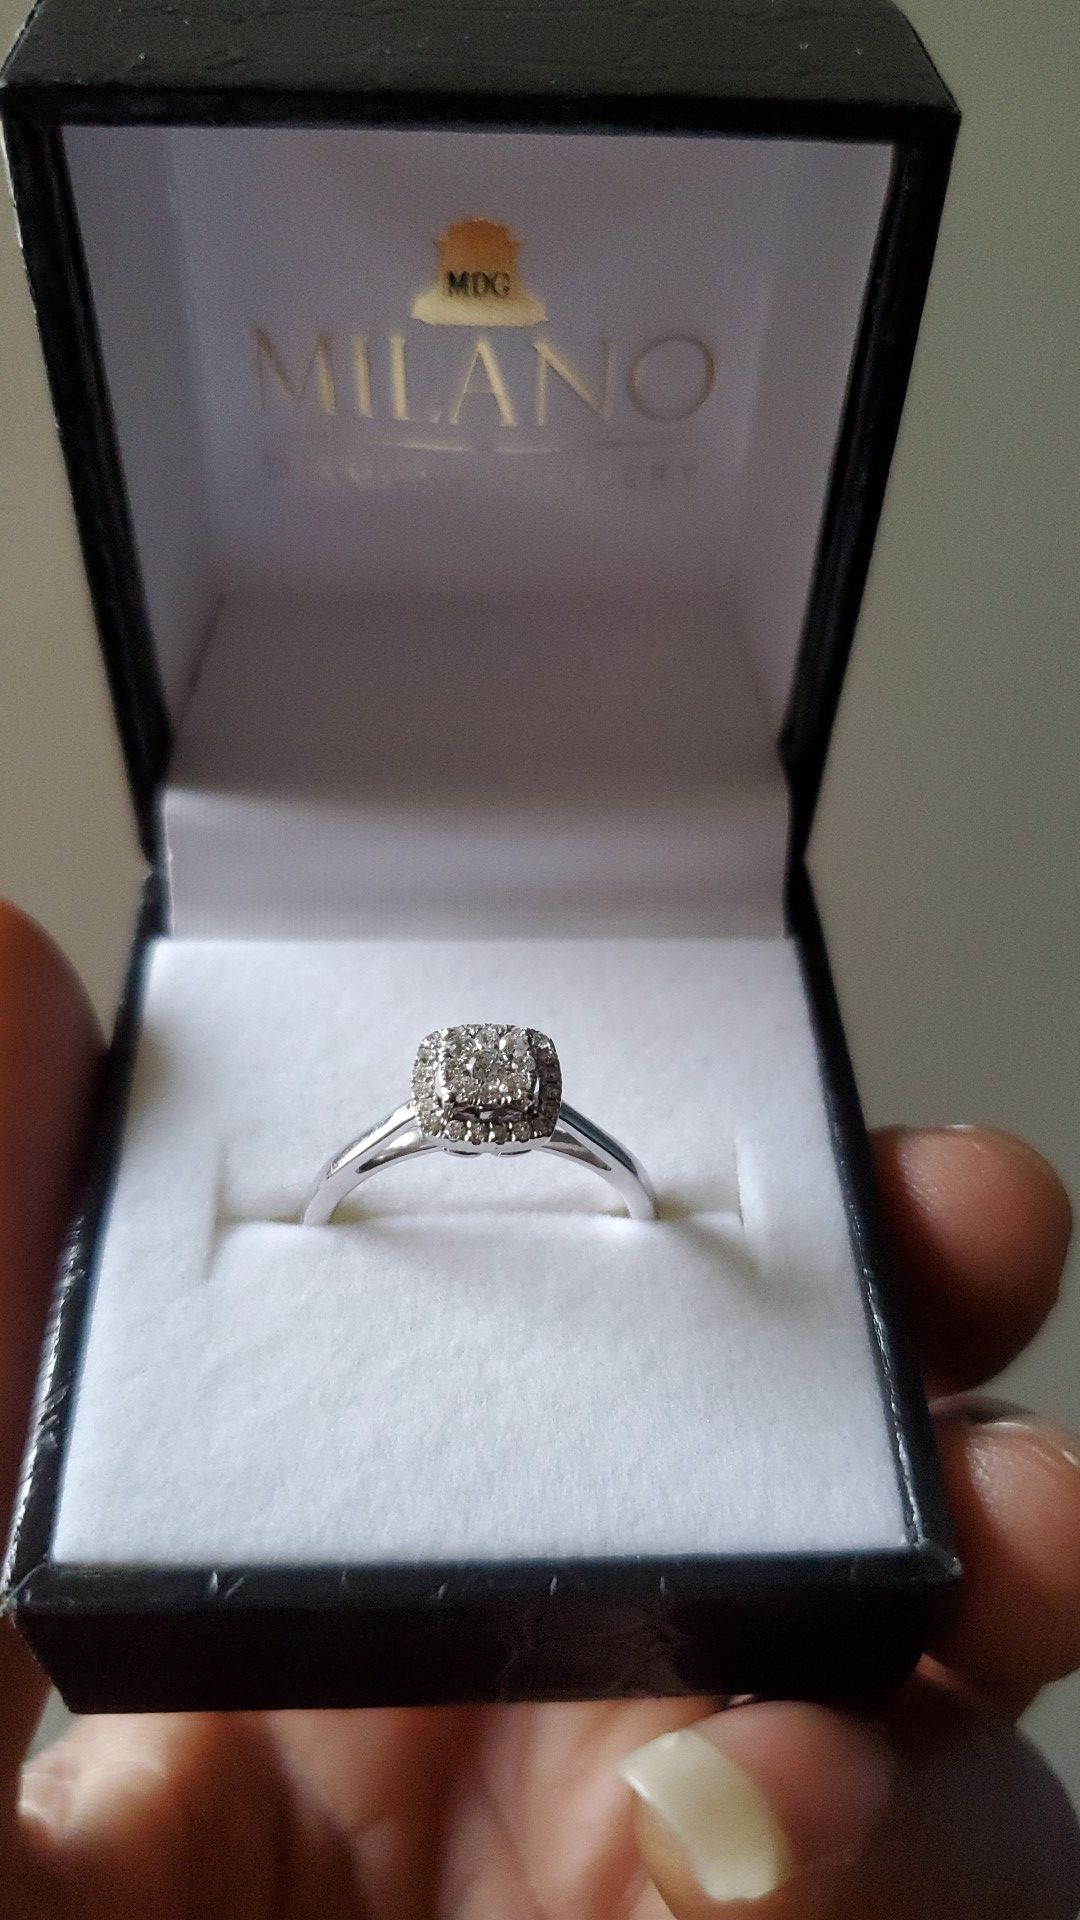 Milano engagement ring 14k have receipt from original purchase in Grand turk